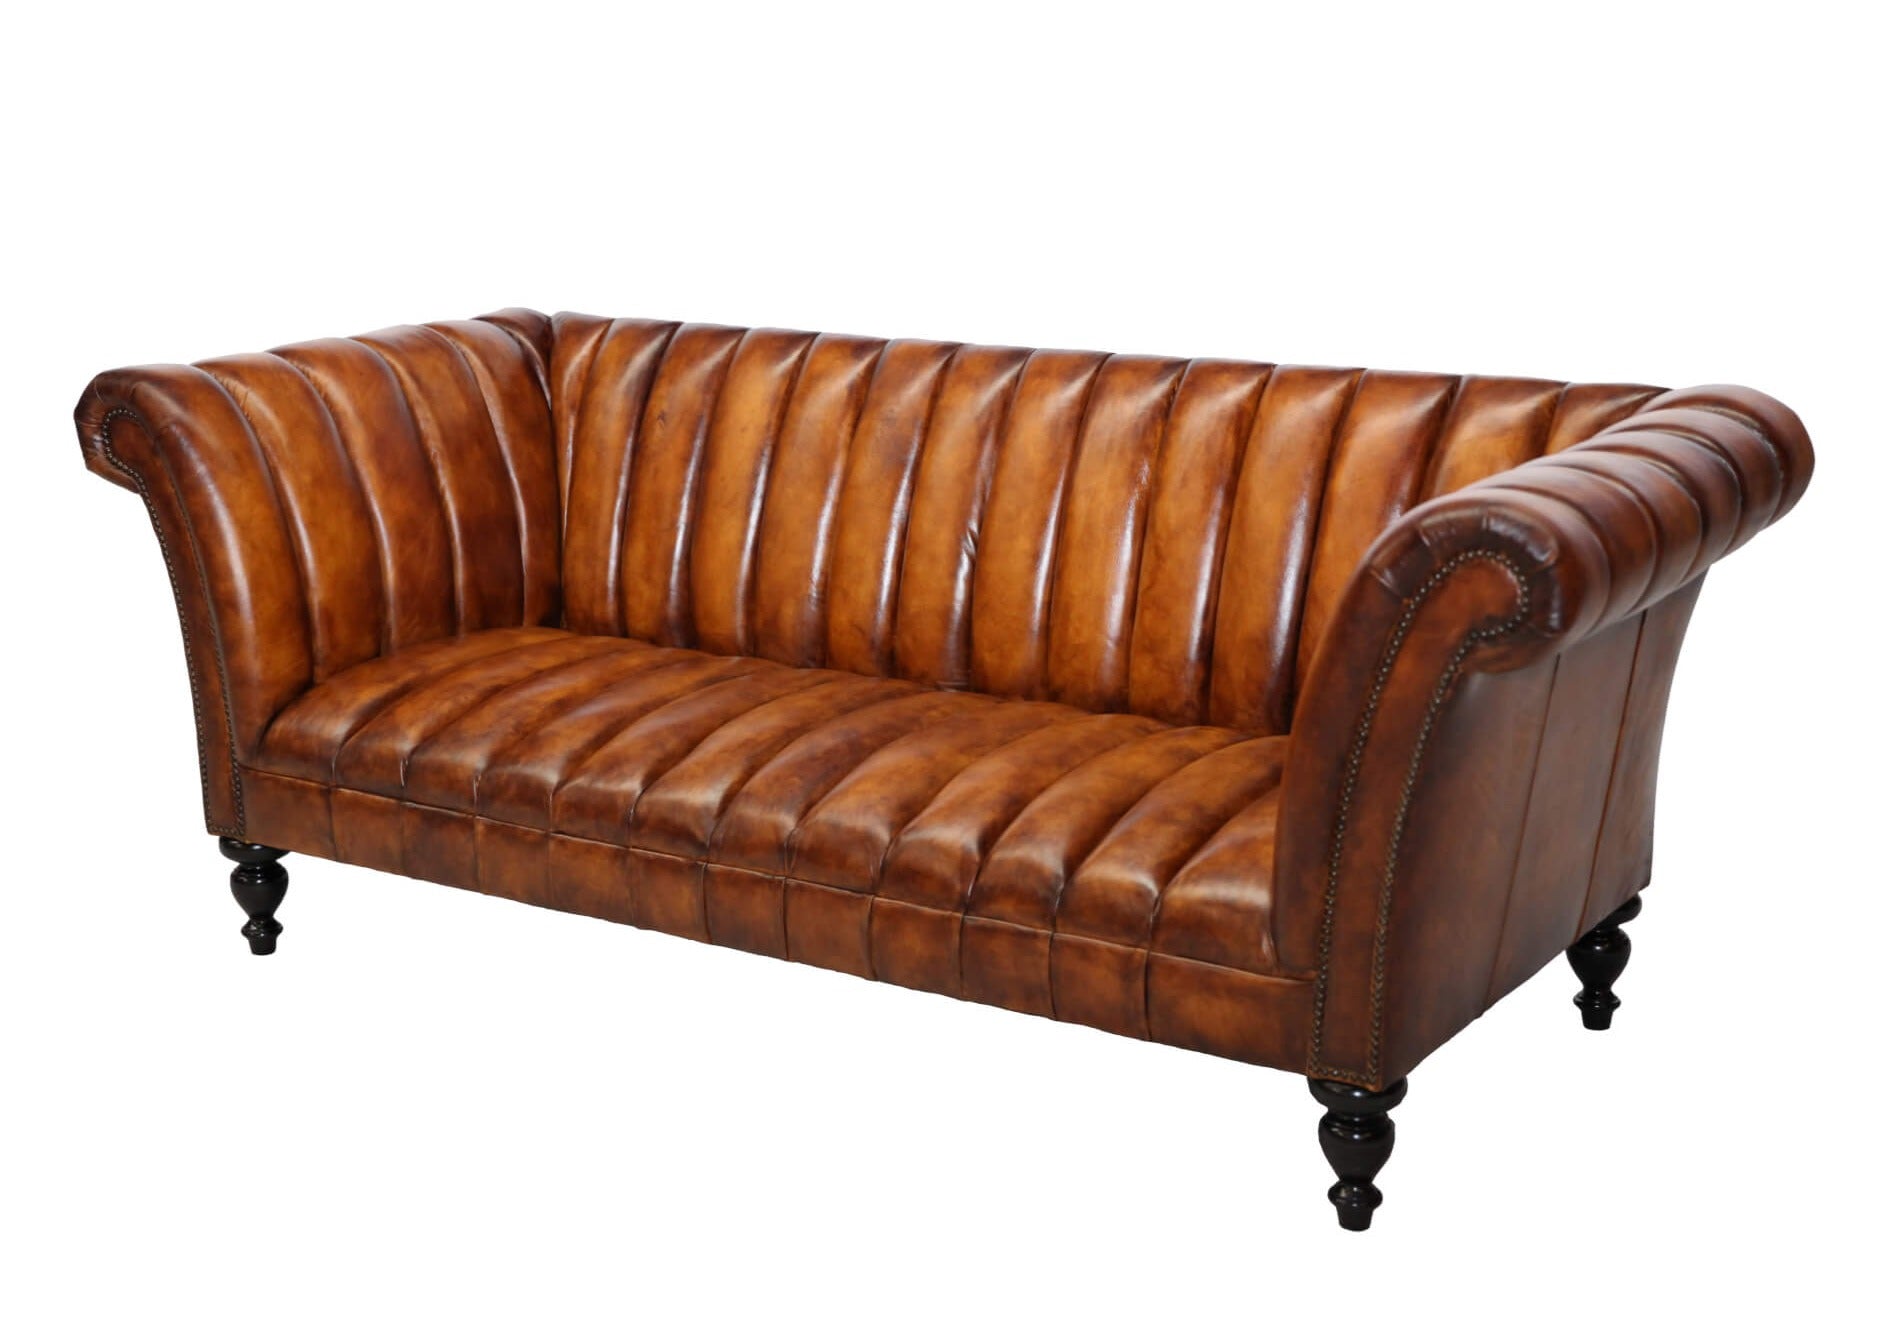 This classic style channeled leather sofa is the perfect addition to your living room. Its channeled design combines timeless style with durable, luxurious leather to make a timeless piece that will last for years to come.